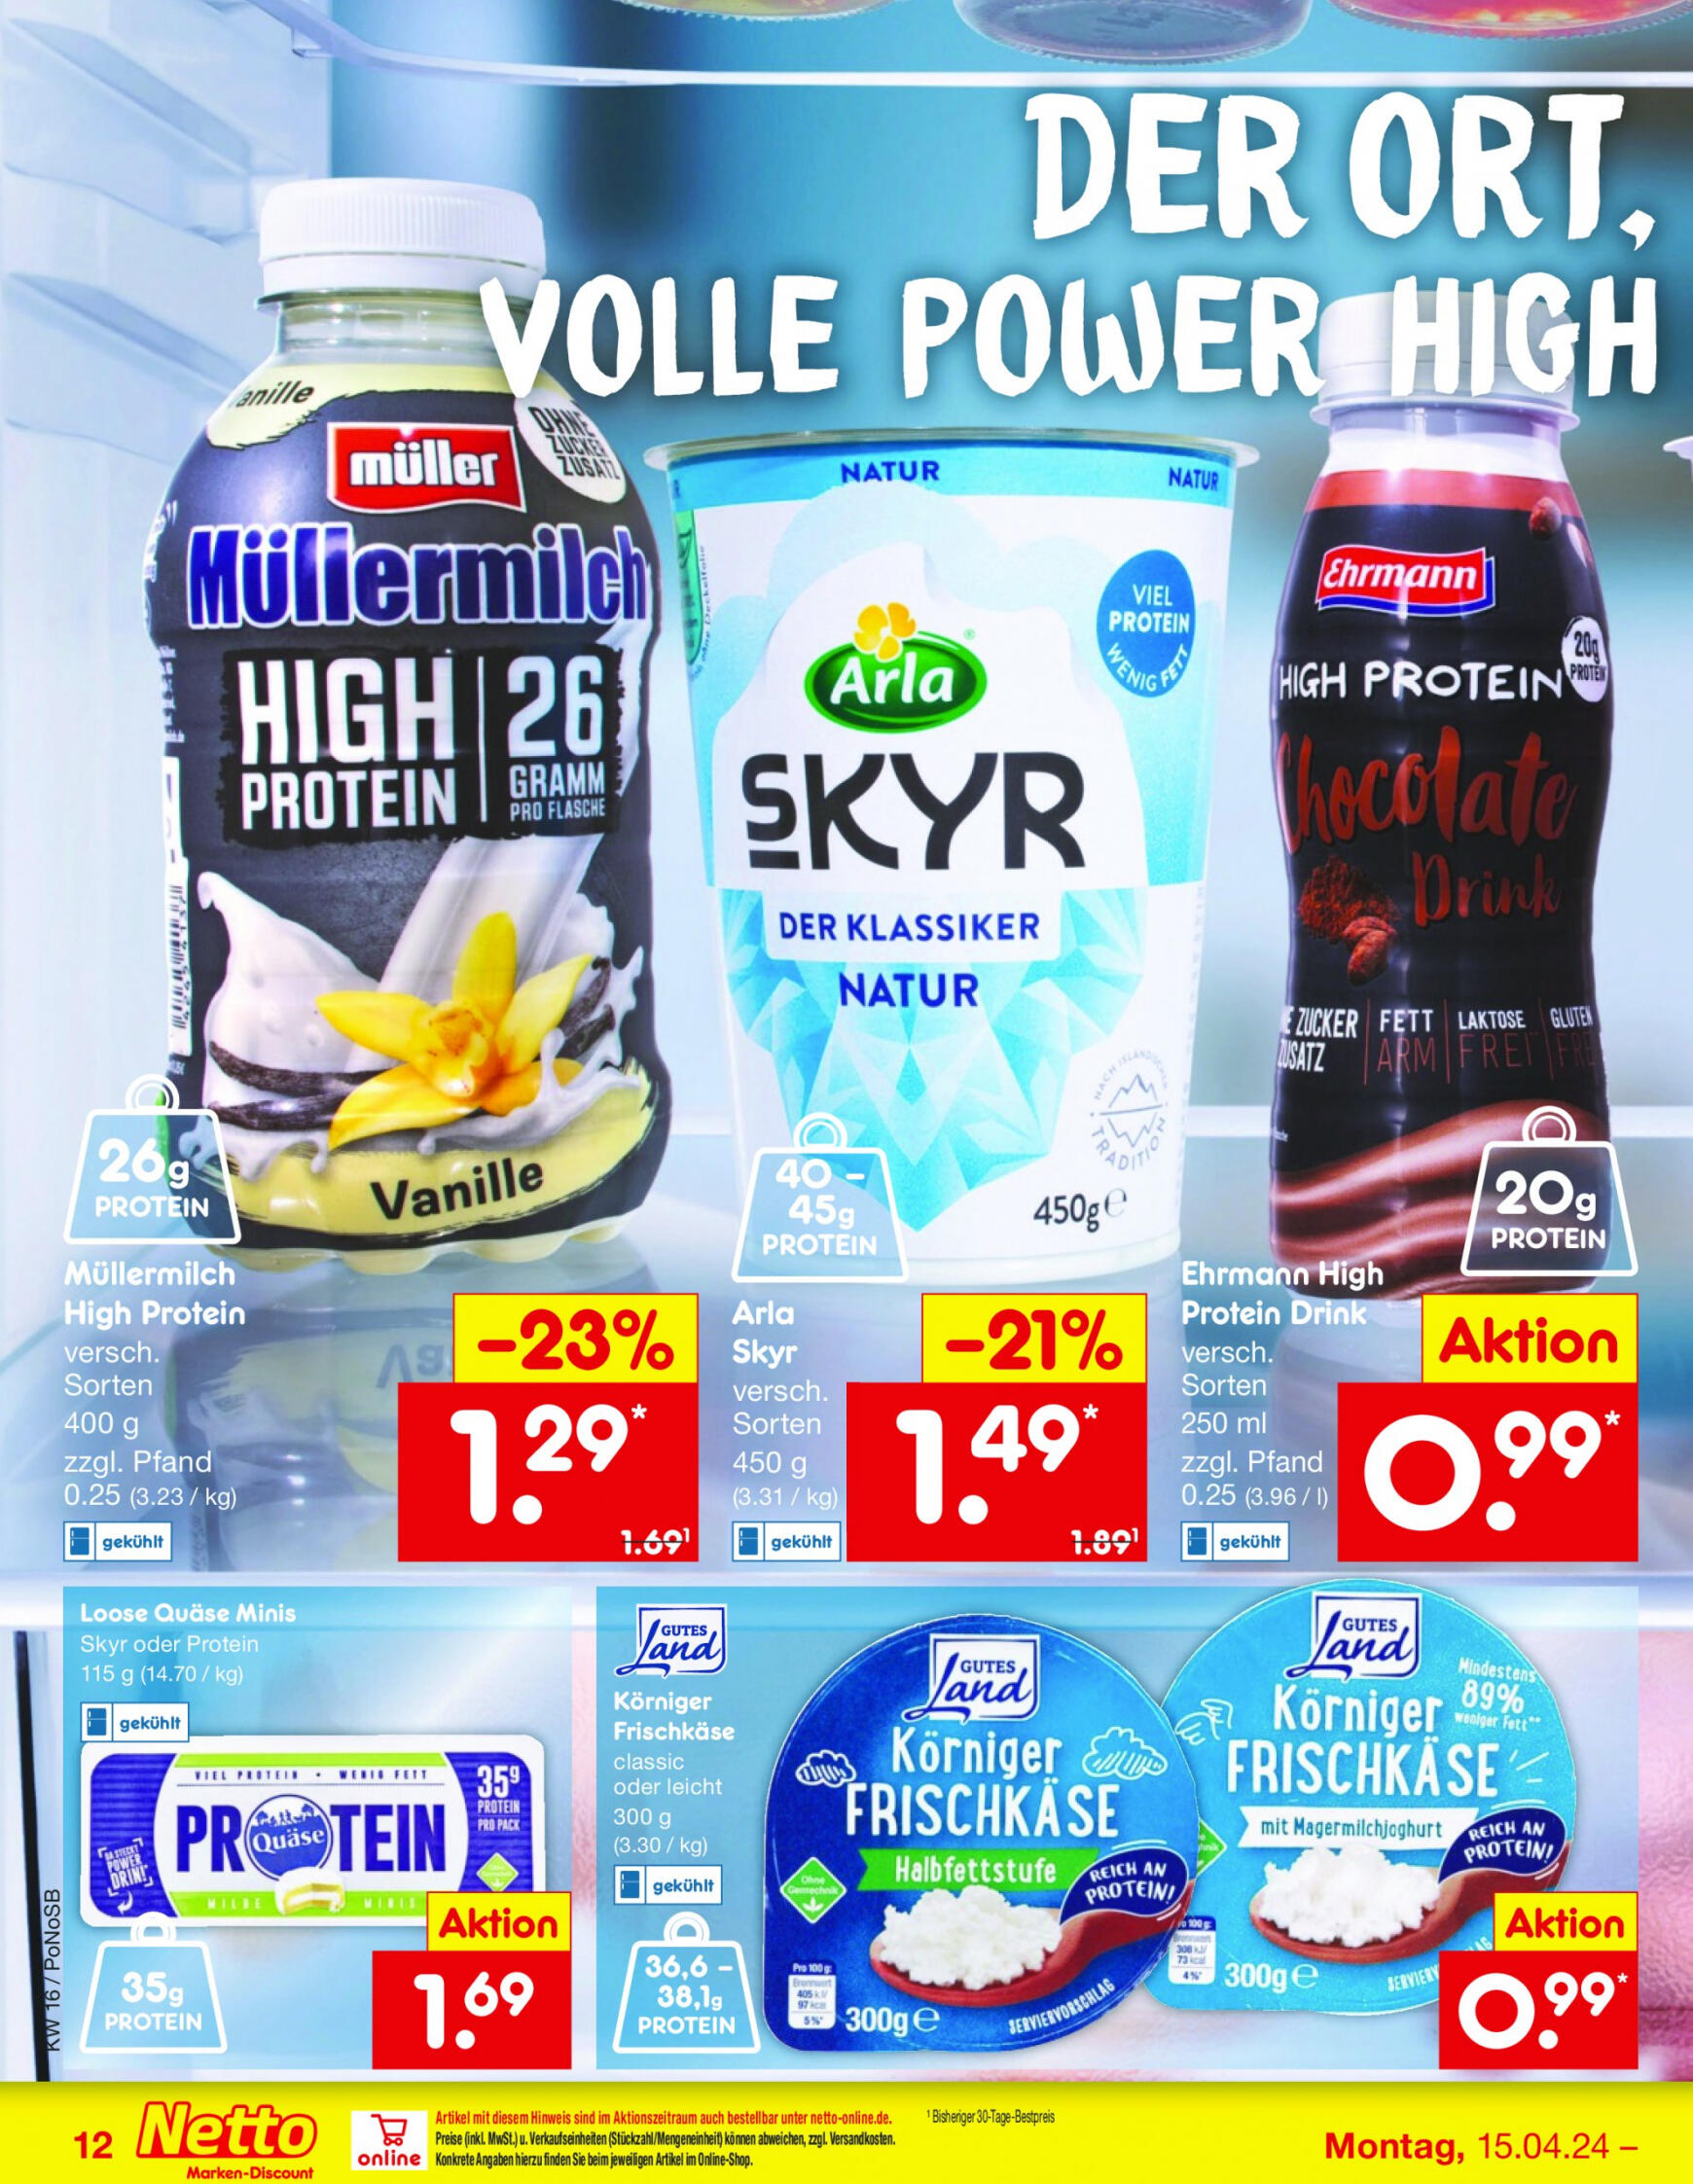 netto - Flyer Netto aktuell 15.04. - 20.04. - page: 12